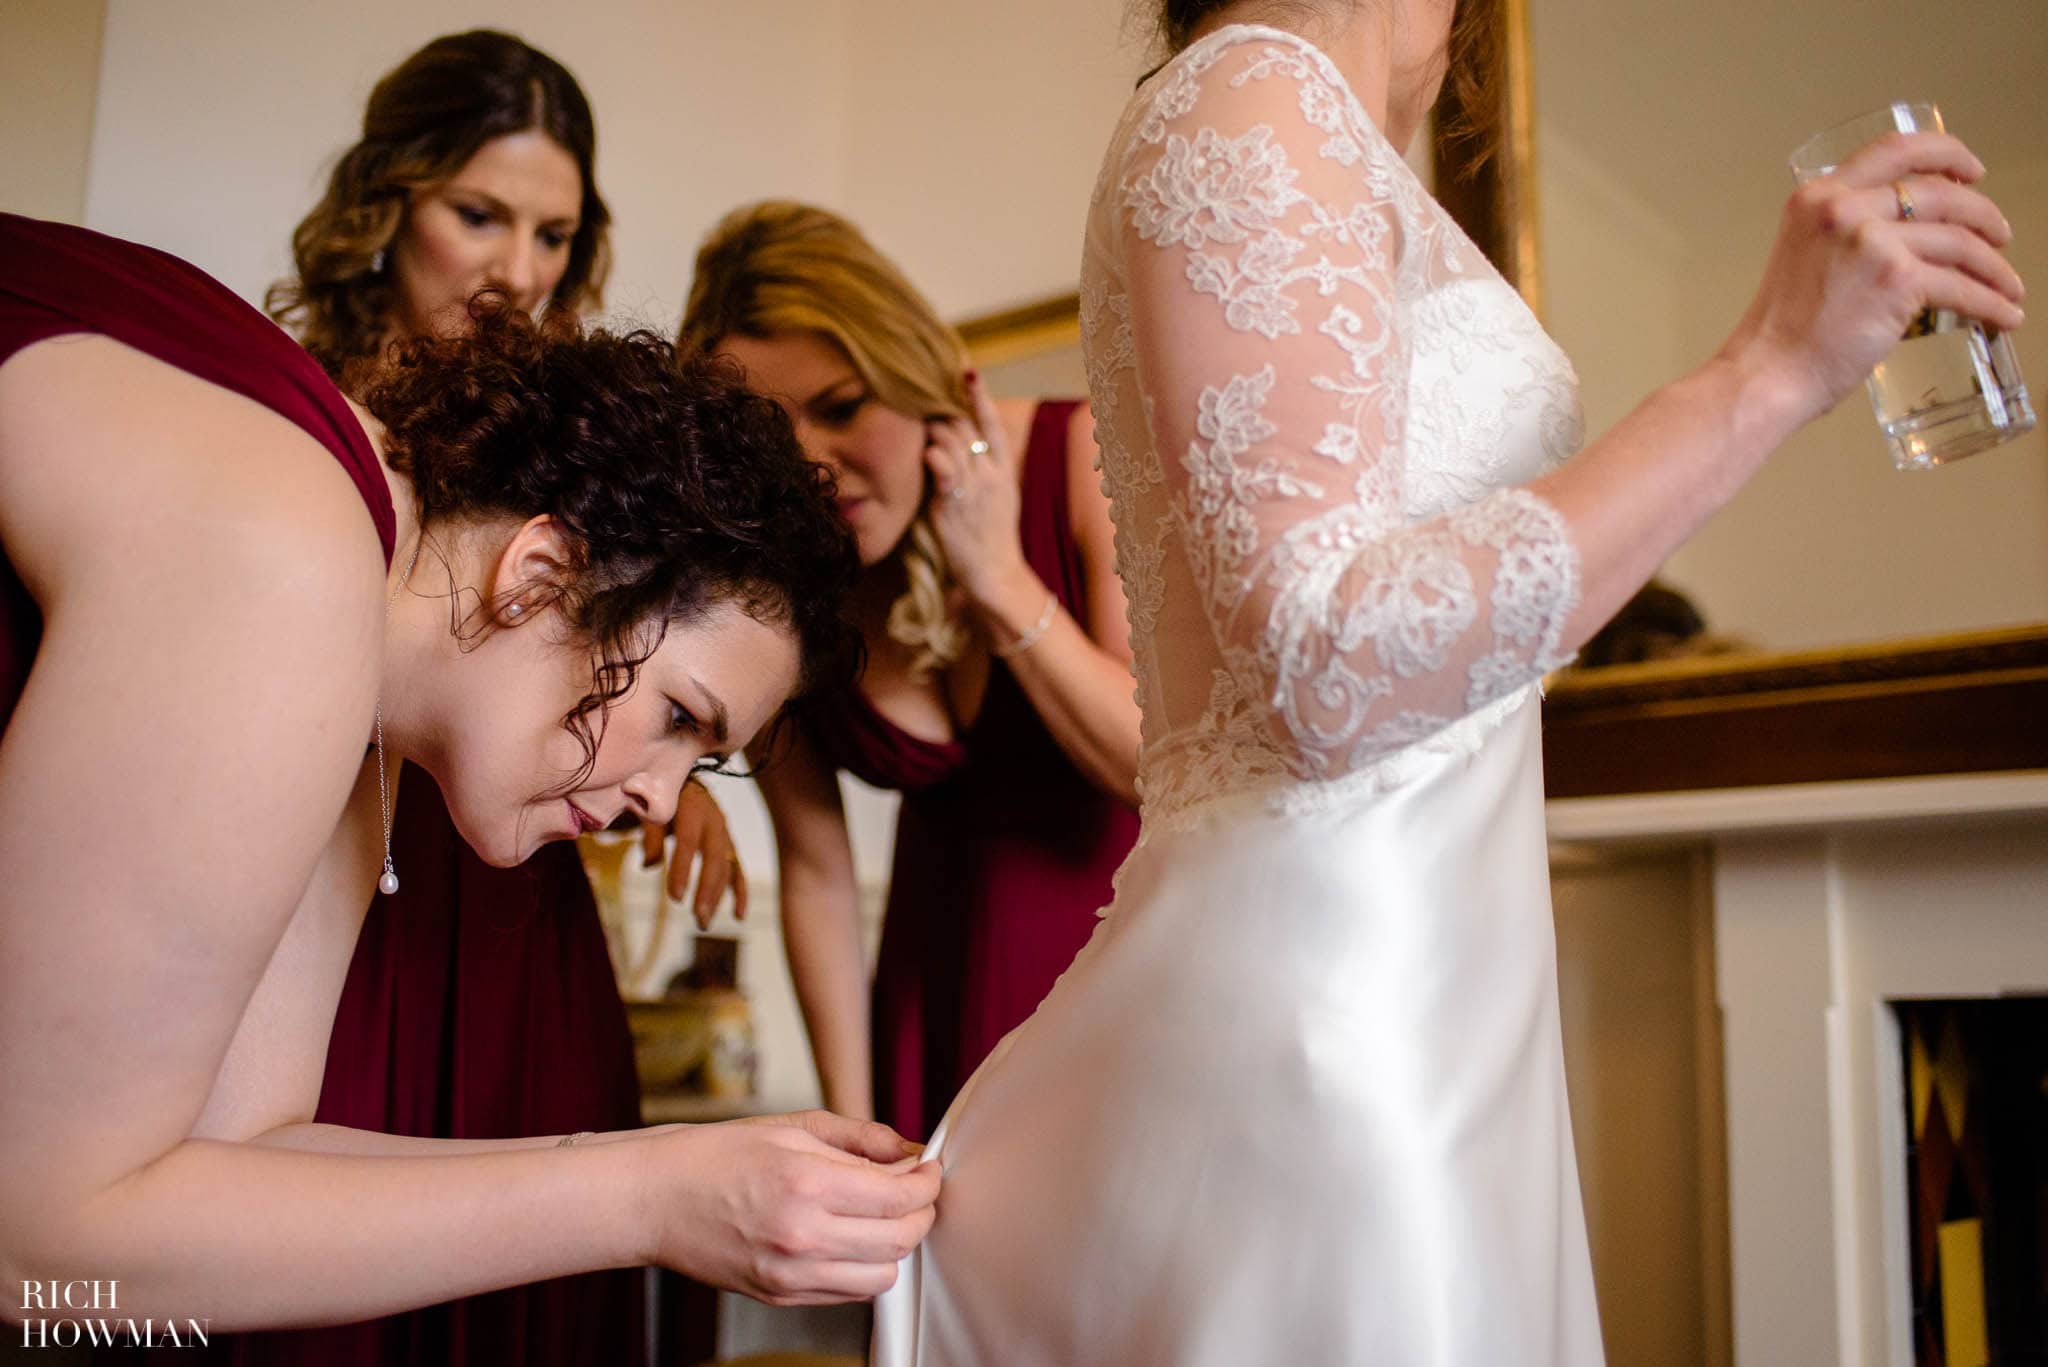 Bridesmaids helping the bride get ready by doing up her wedding dress at the back